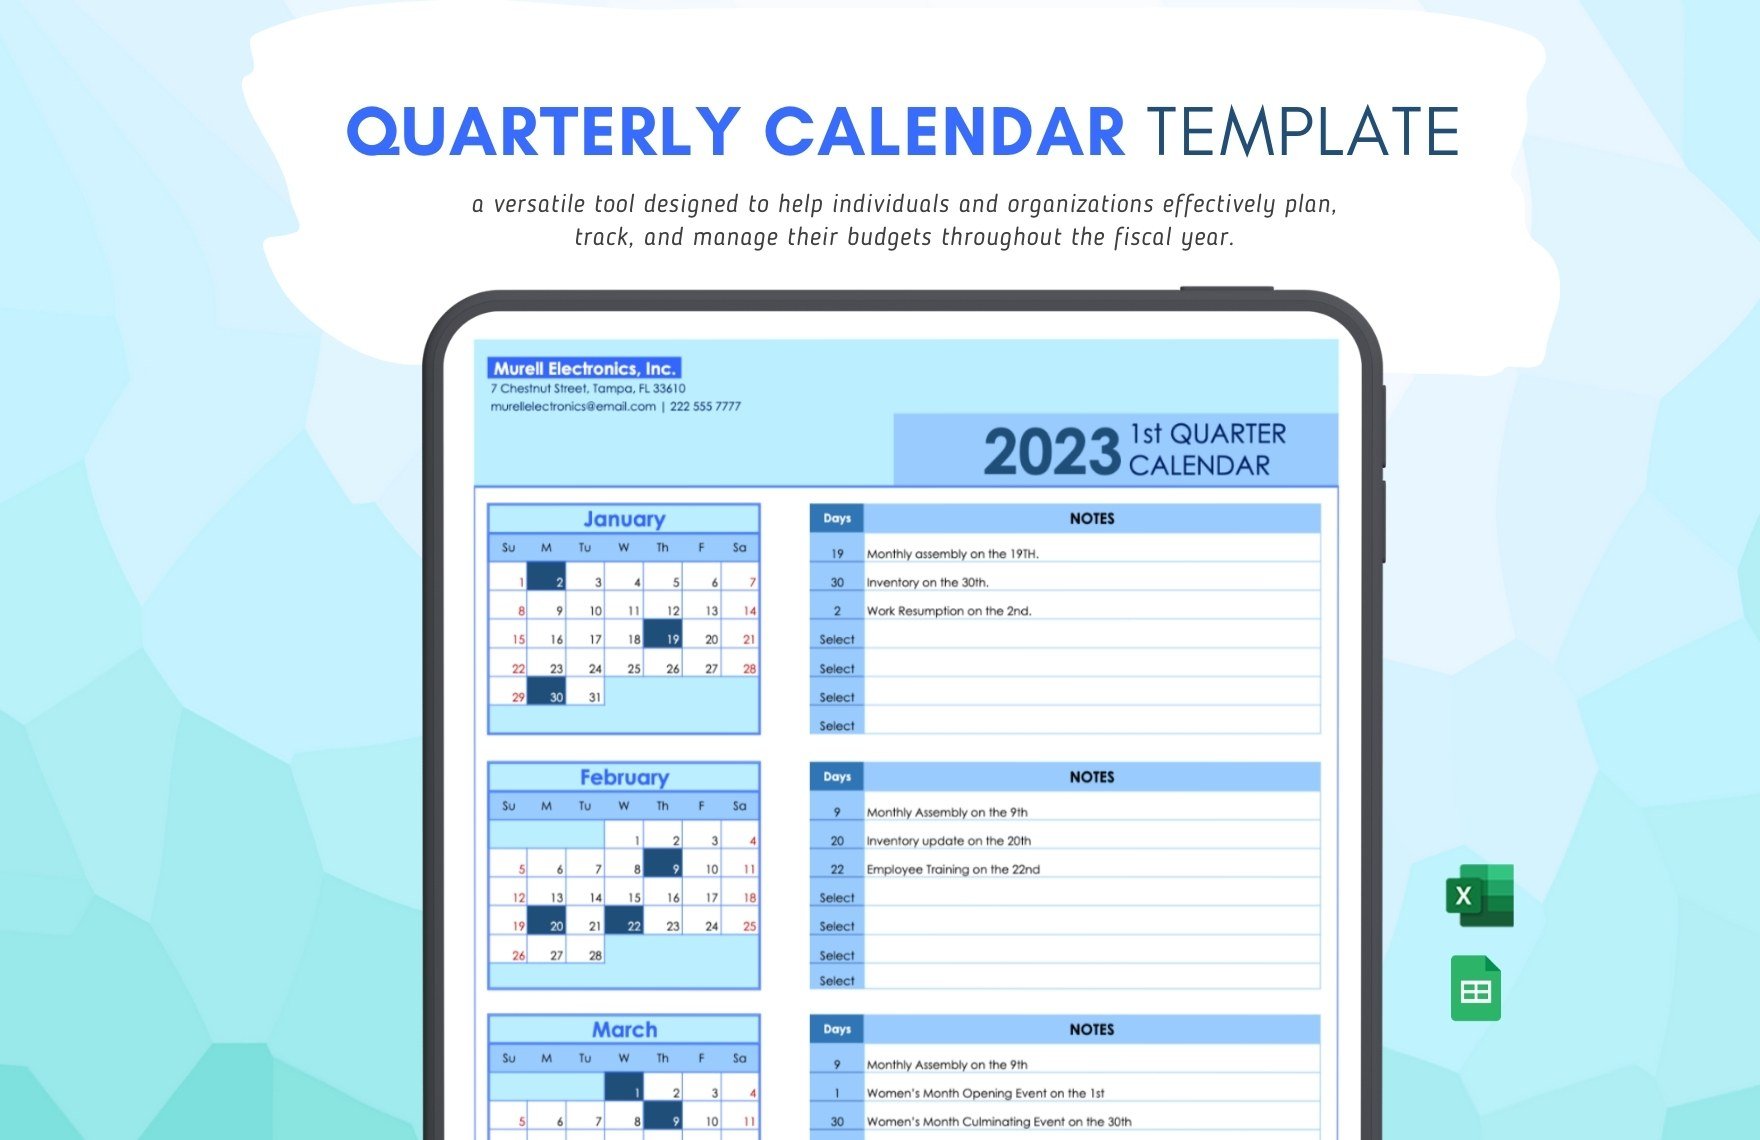 Quarterly Calendar Template in Excel, Google Sheets